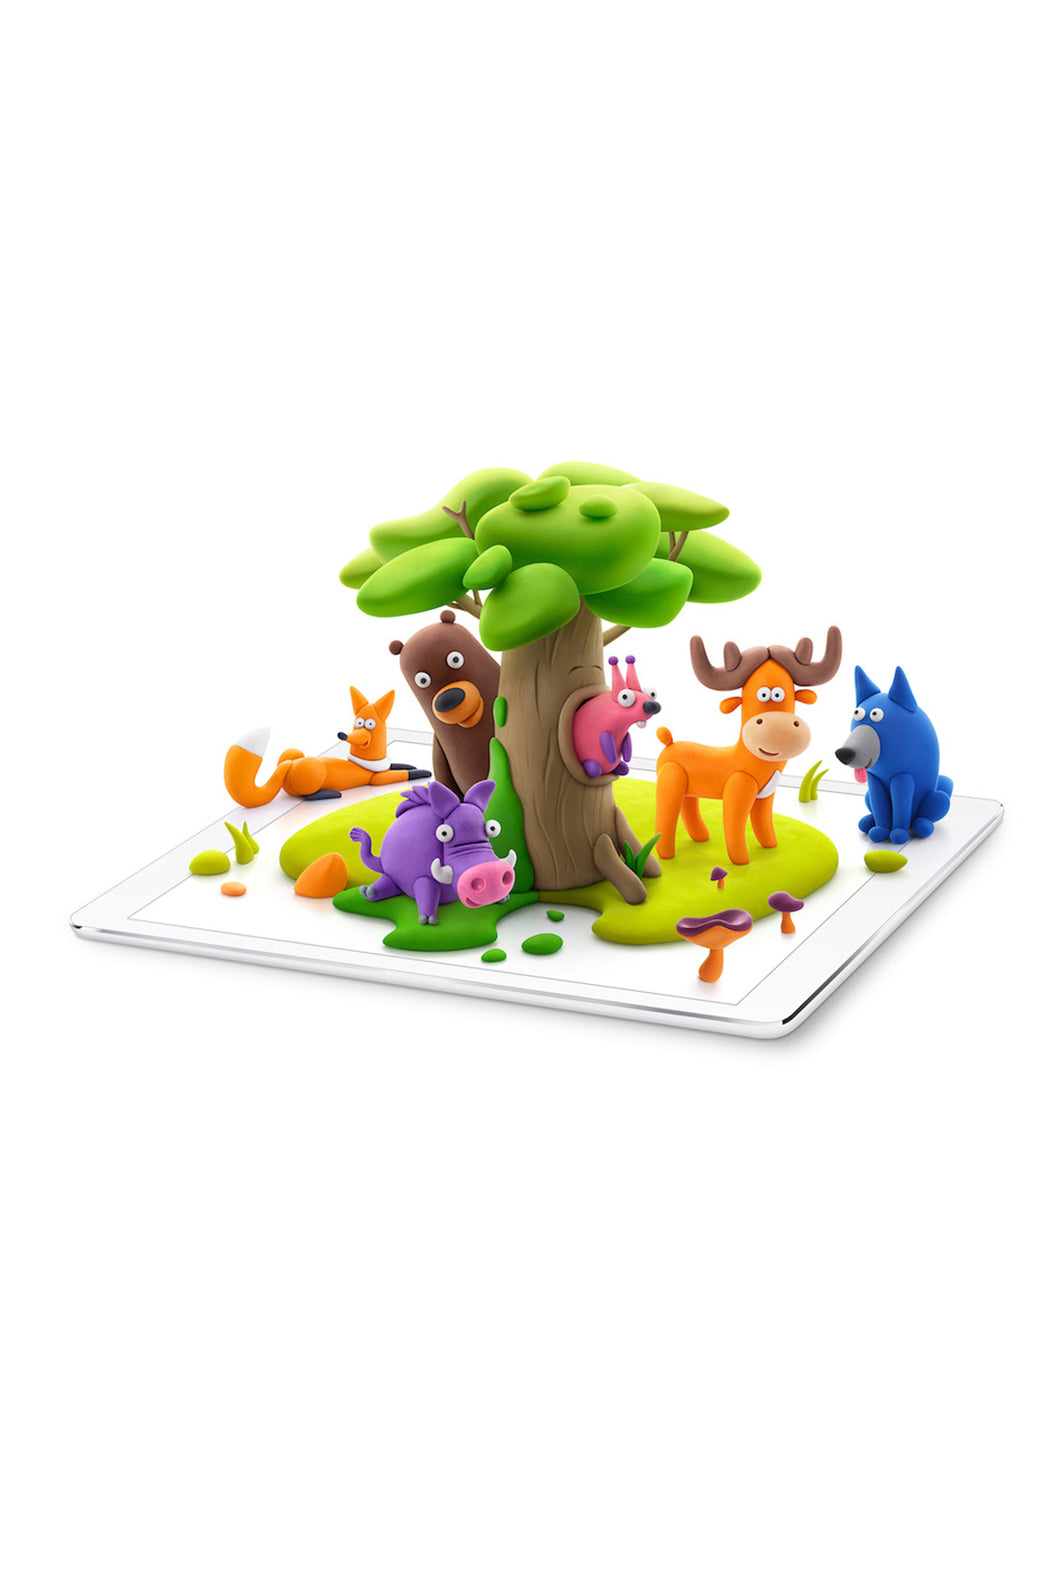 Fat Brain toys Hey Clay - Forest Animals